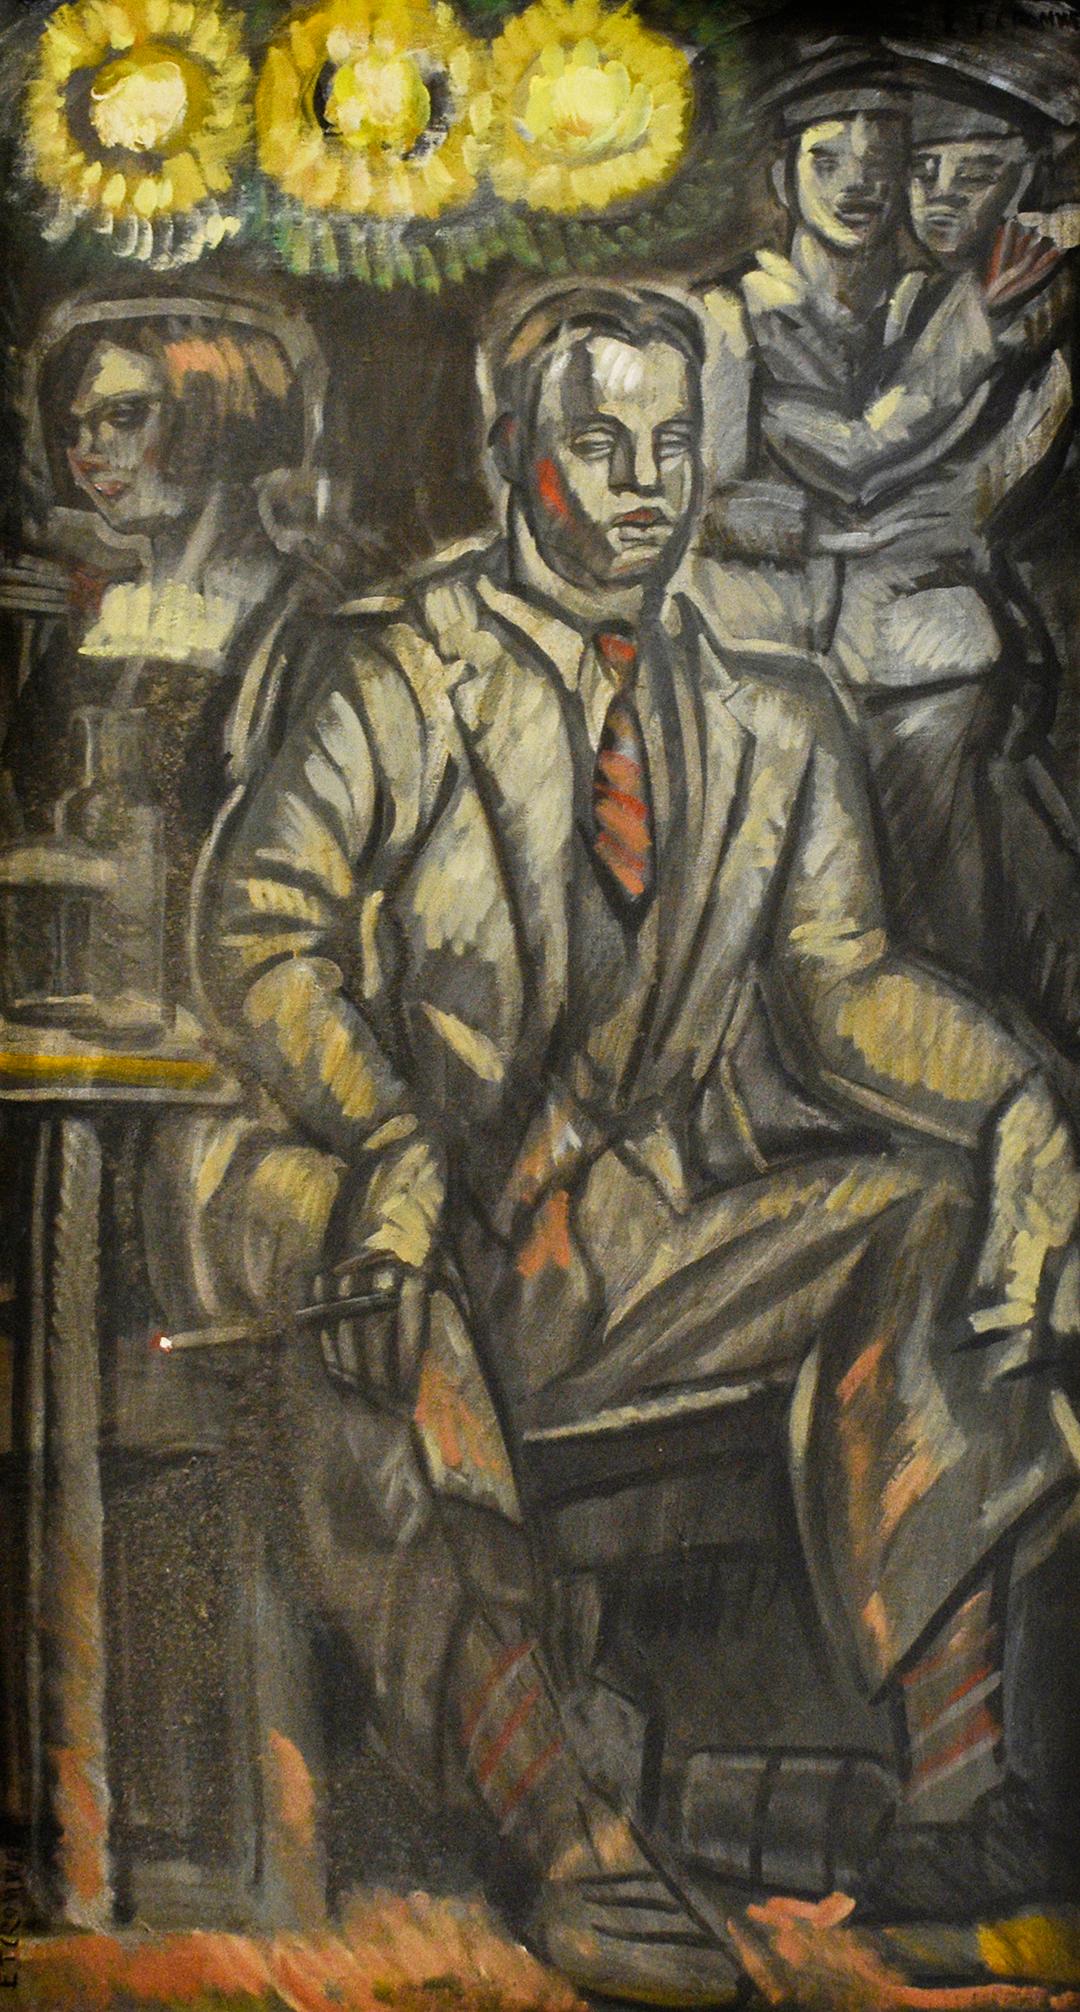 Man in Suit (WPA Style Figurative Painting by Mark Beard as Edith Cromwell) 